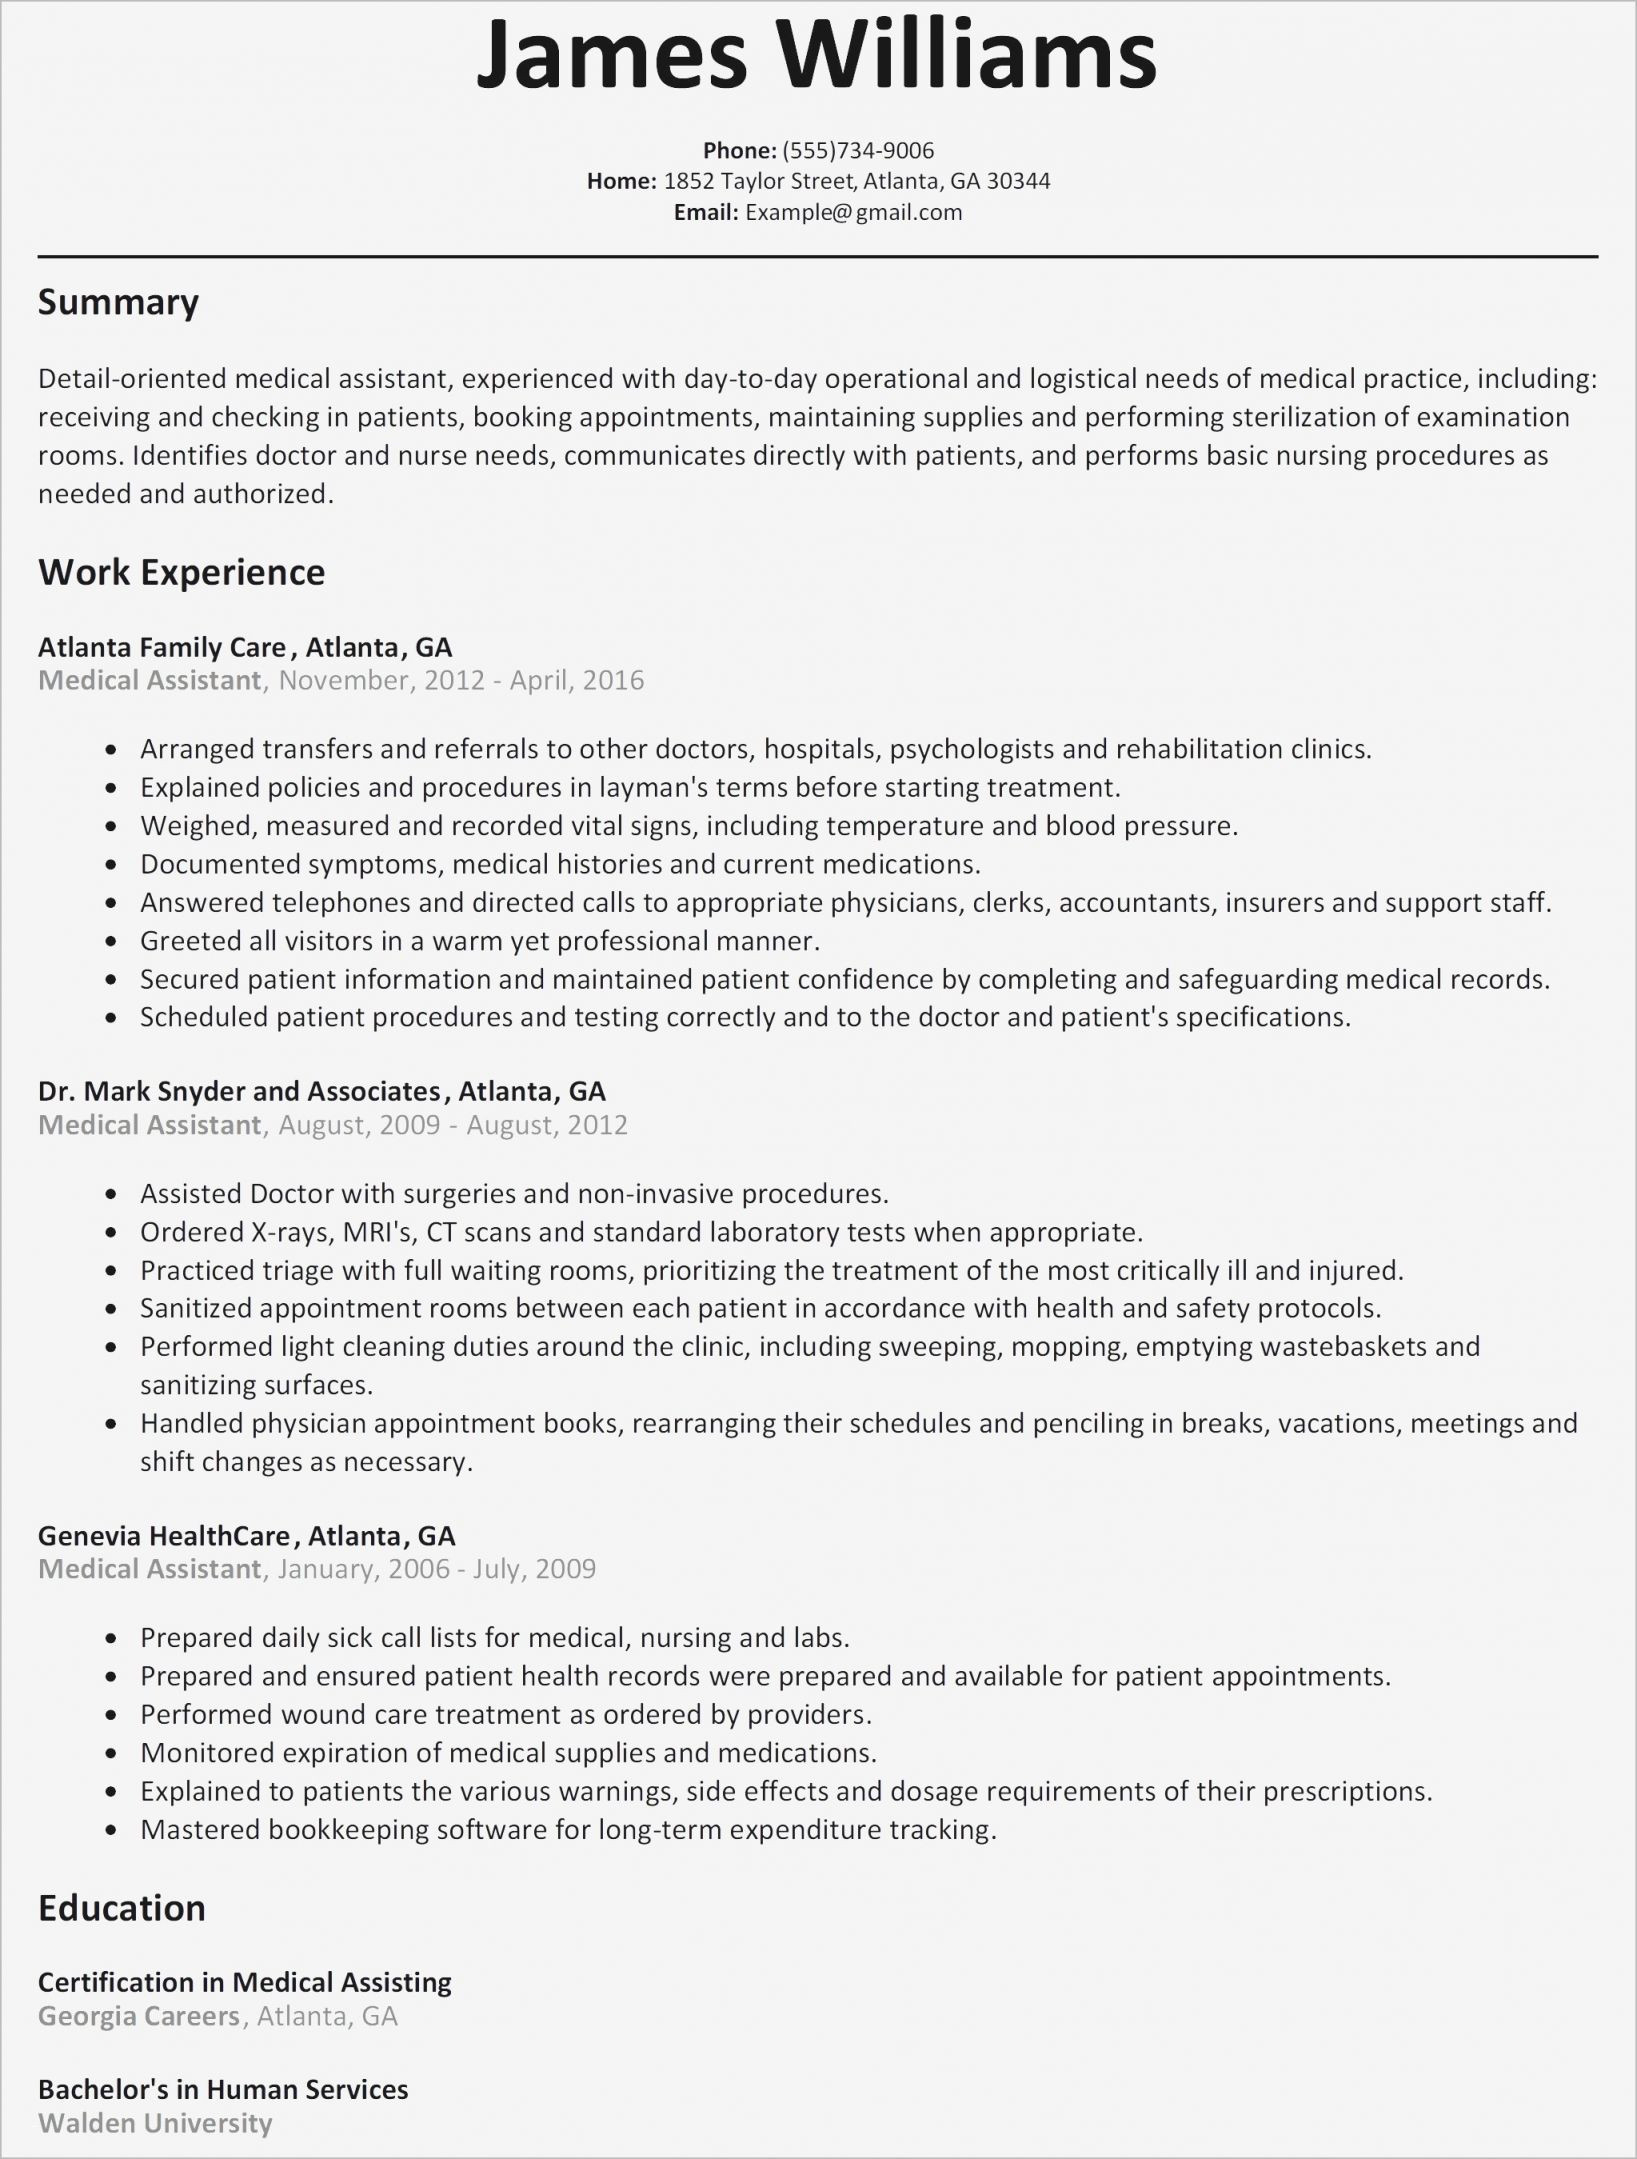 Perfect Resume Example  Automotive Resume Fresh Lovely Perfect Resume Examples 2016 Sq67